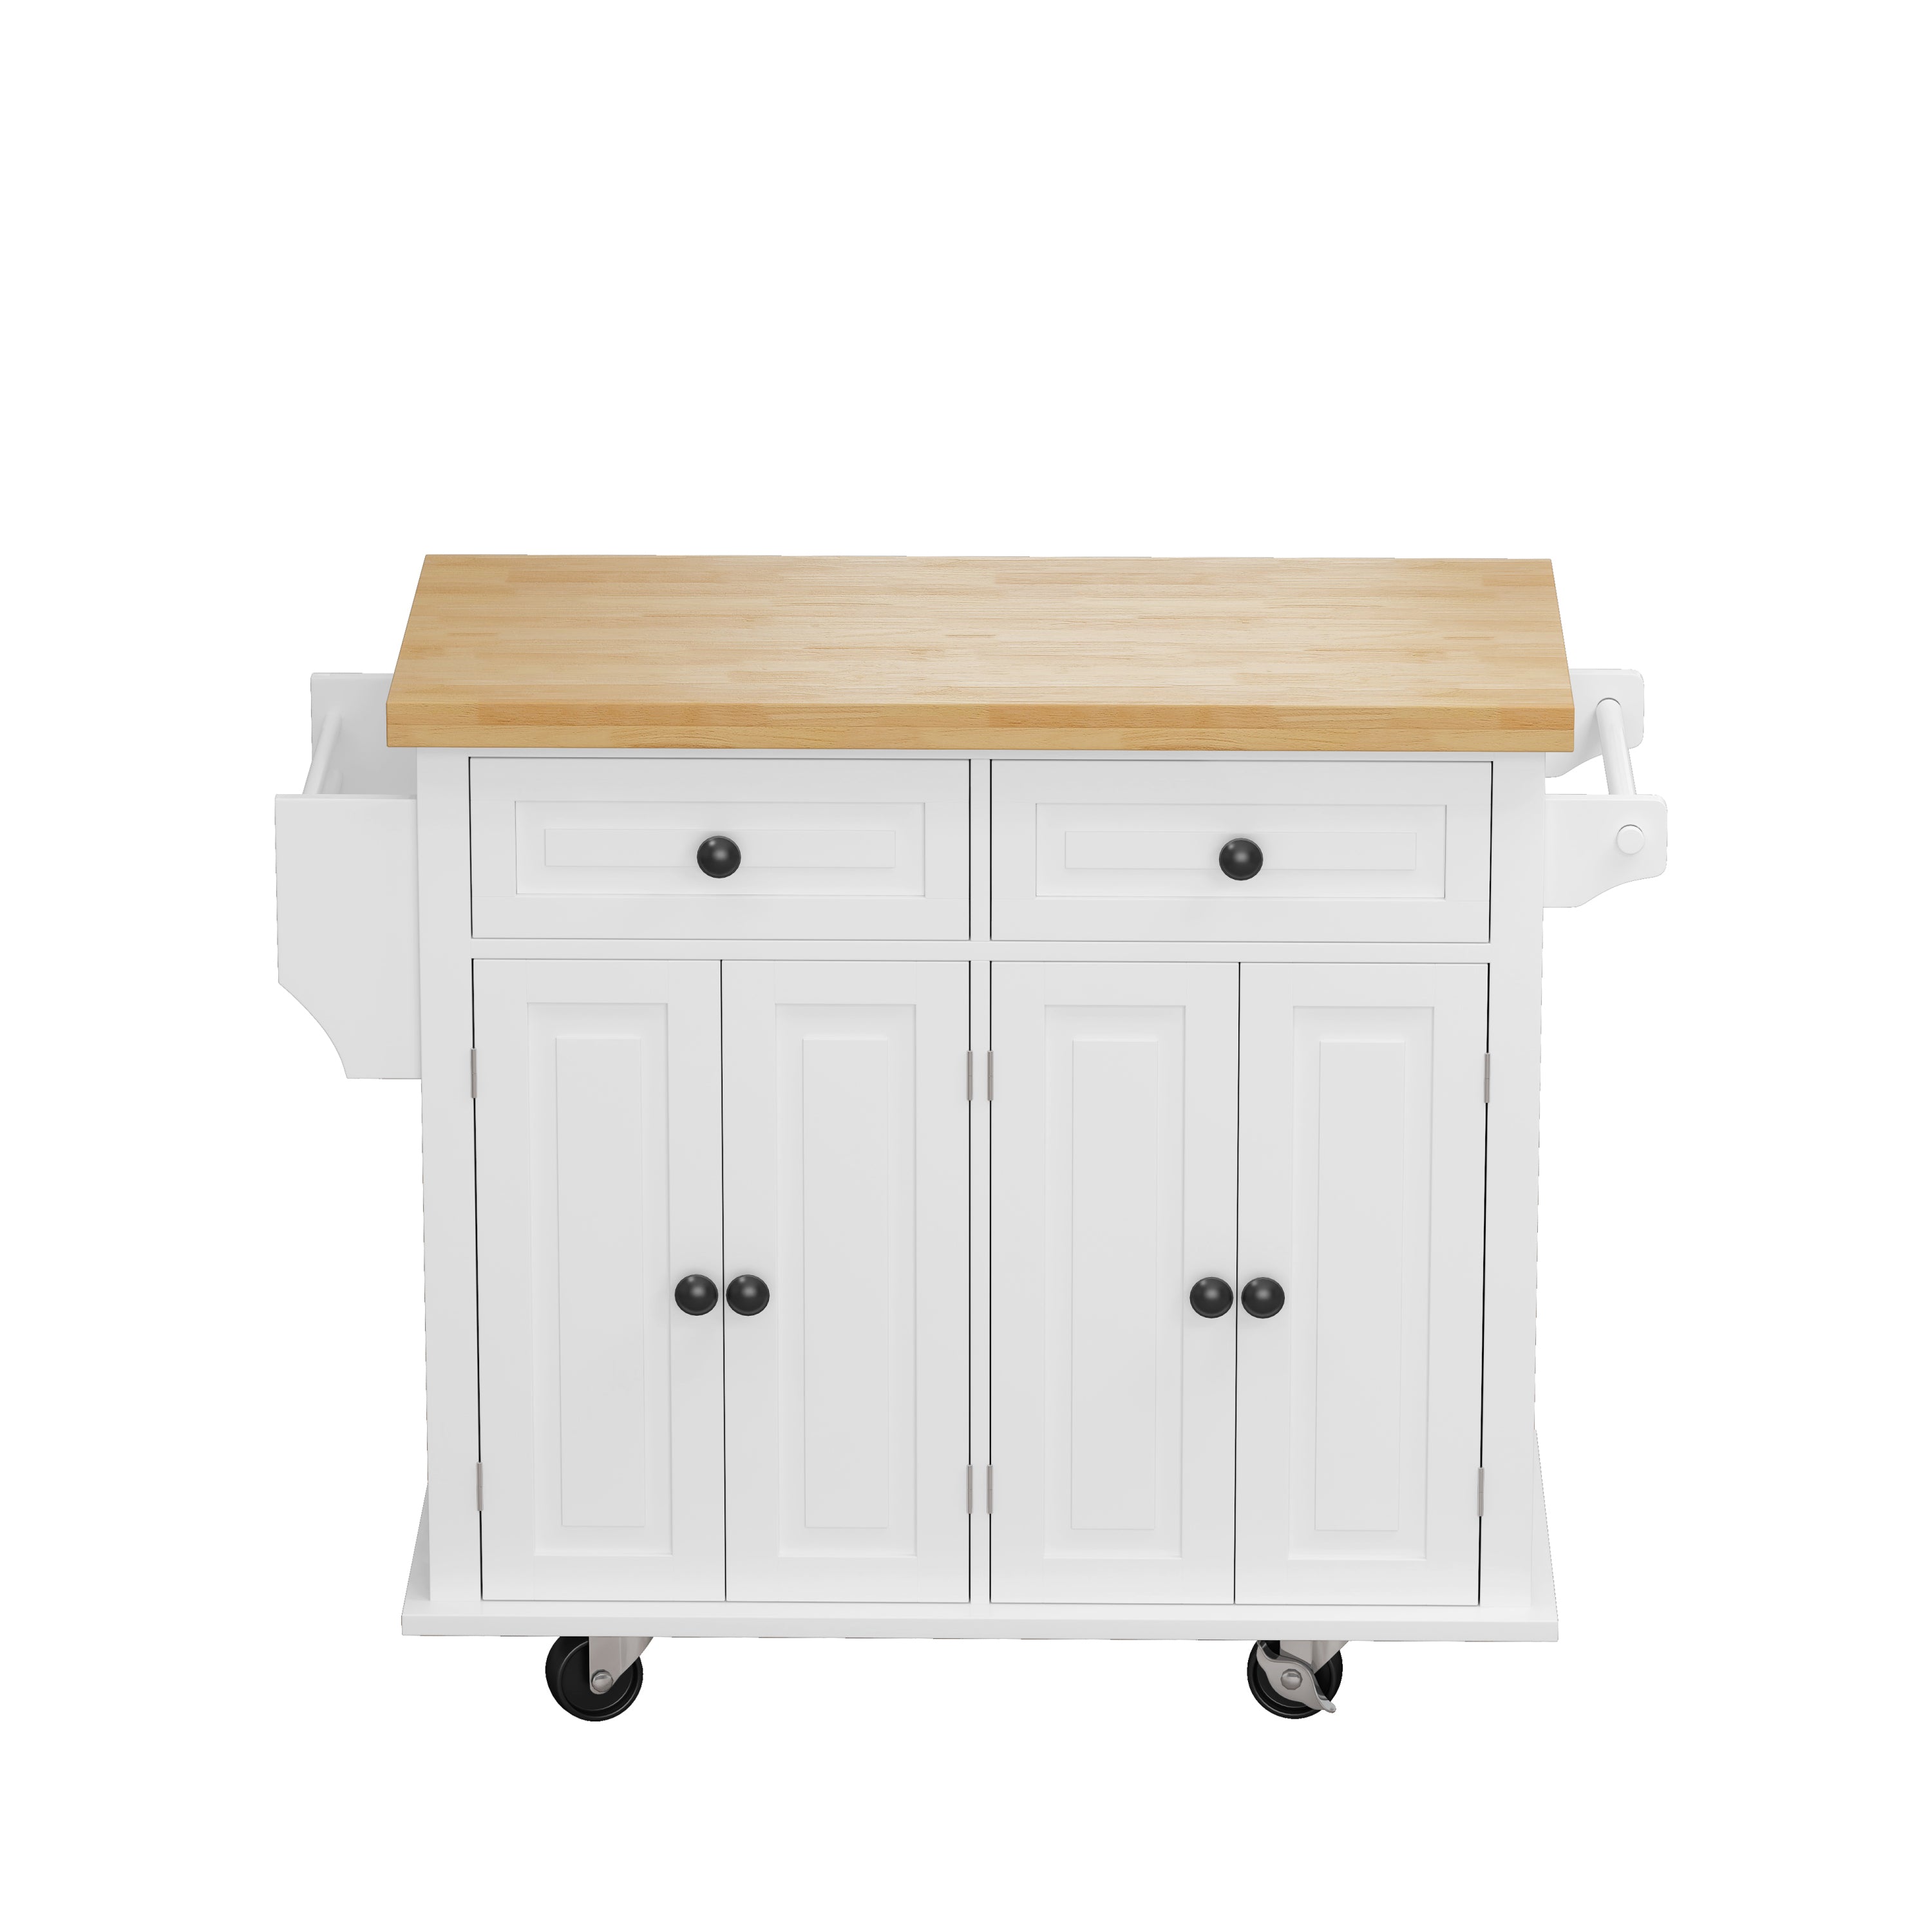 43.31" Kitchen Island Cart with 2 Storage Cabinets, 2 Locking Wheels, 4 Door Cabinets, 2 Drawers, Spice Rack & Towel Rack (White)